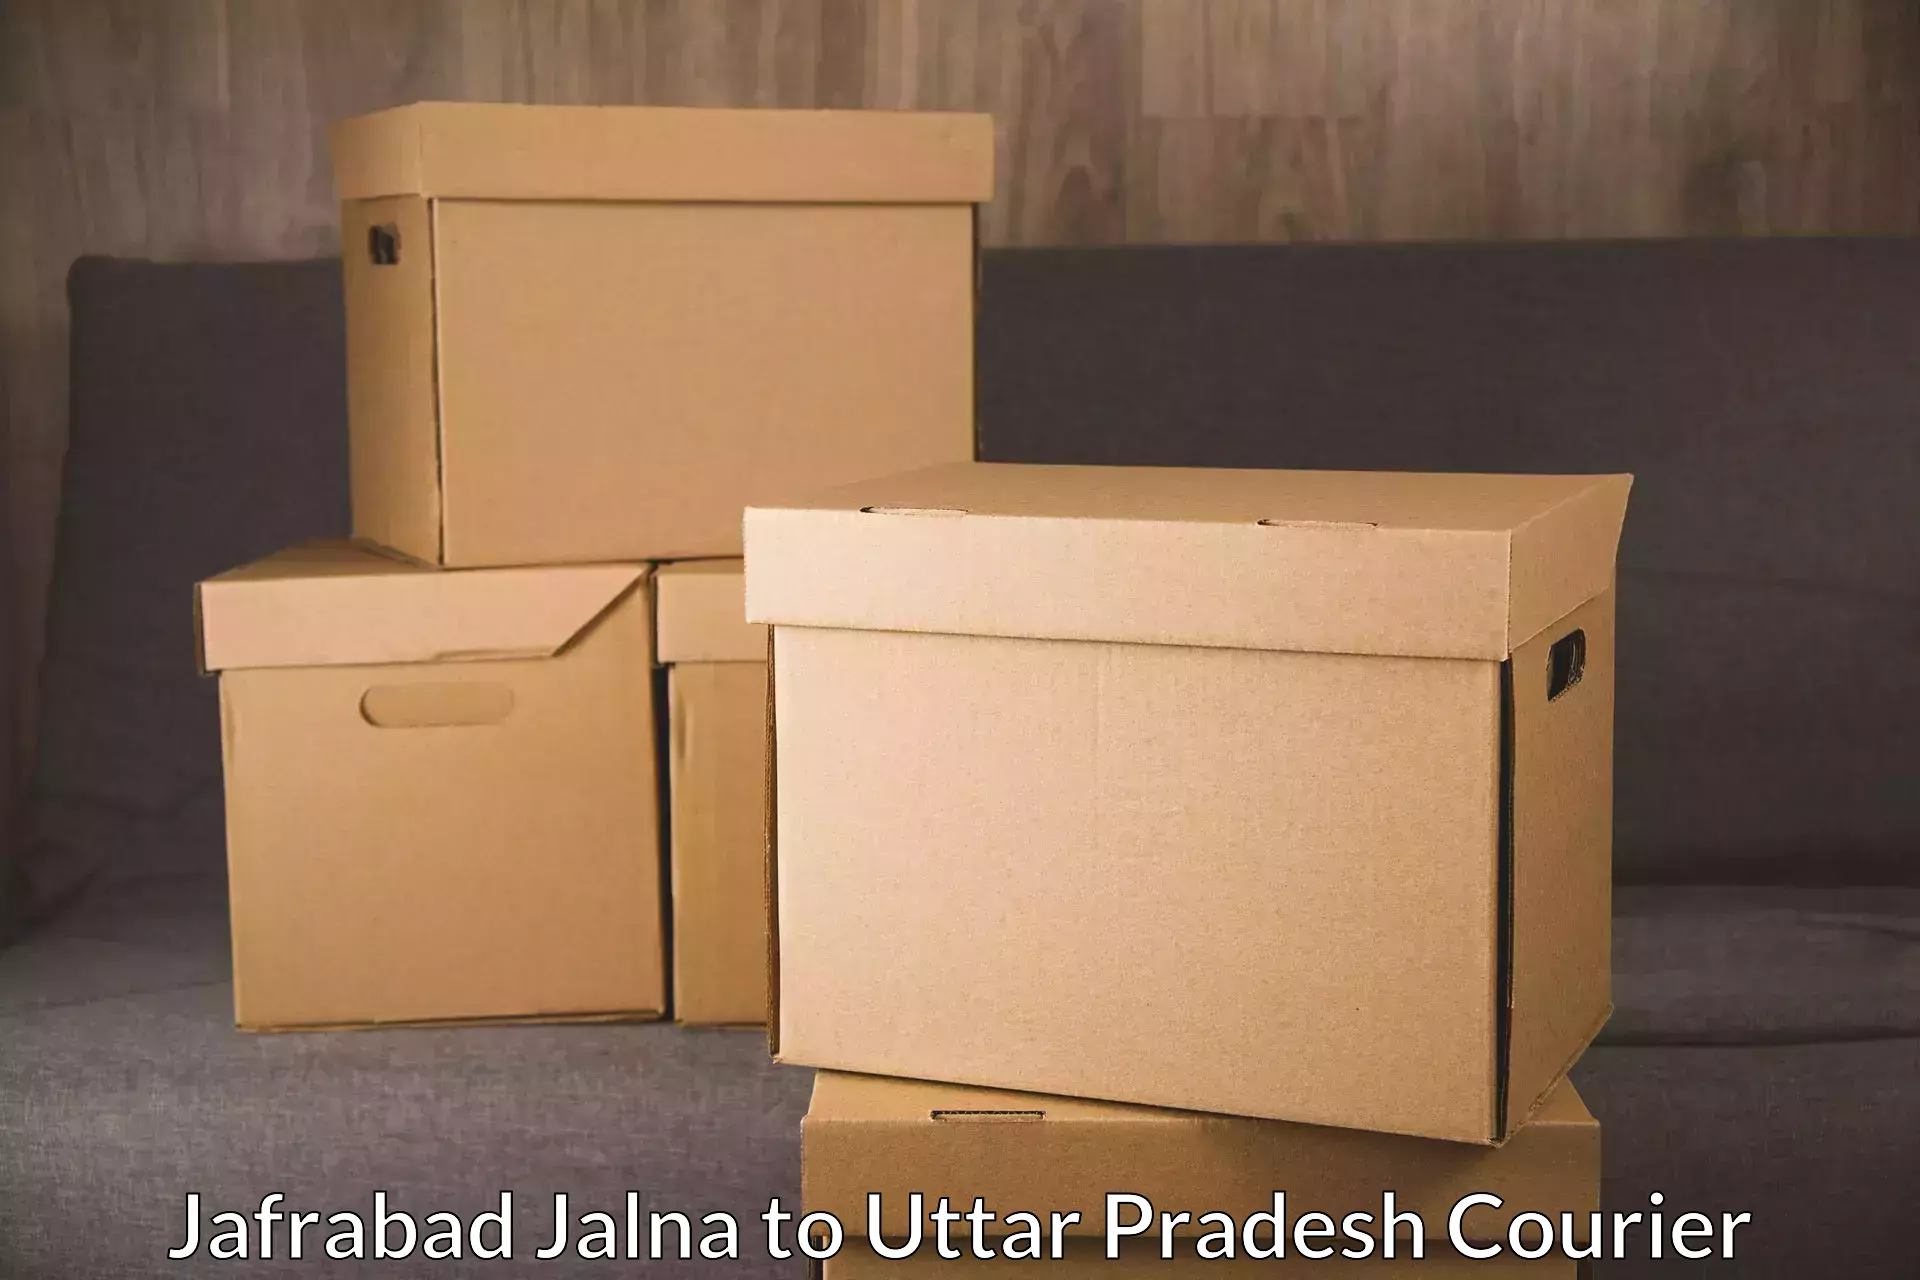 Air courier services in Jafrabad Jalna to Allahabad